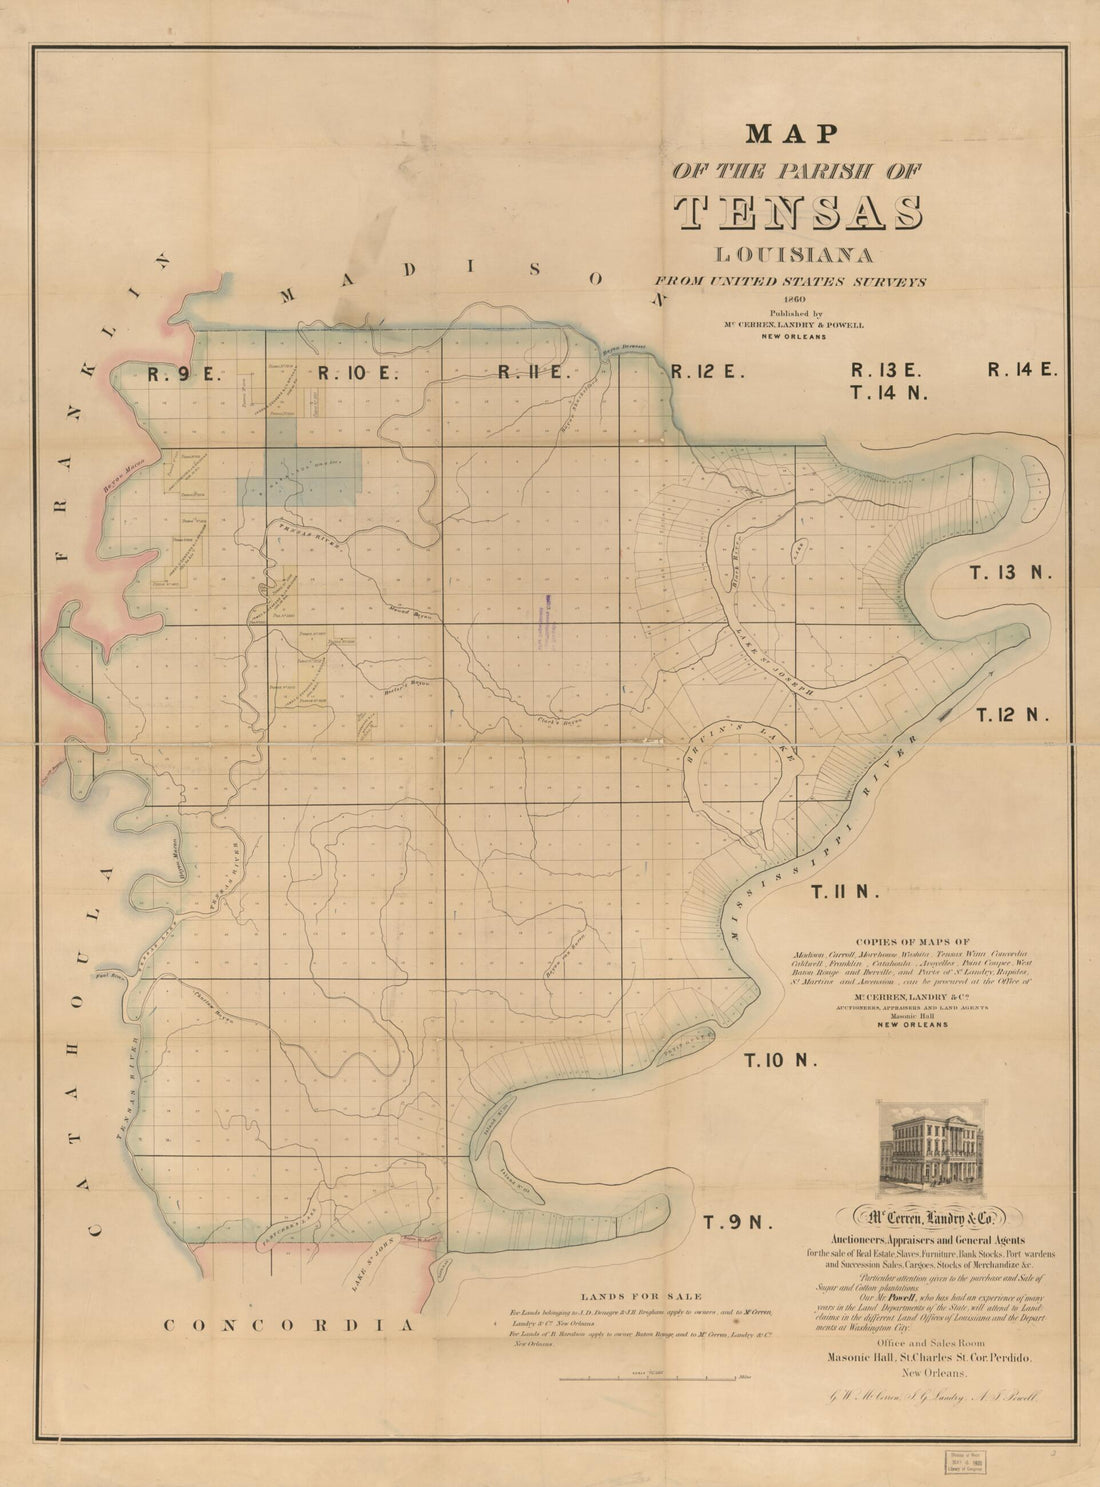 This old map of Map of the Parish of Tensas, Louisiana : from United States Surveys from 1860 was created by Landry &amp; Powell McCerren in 1860